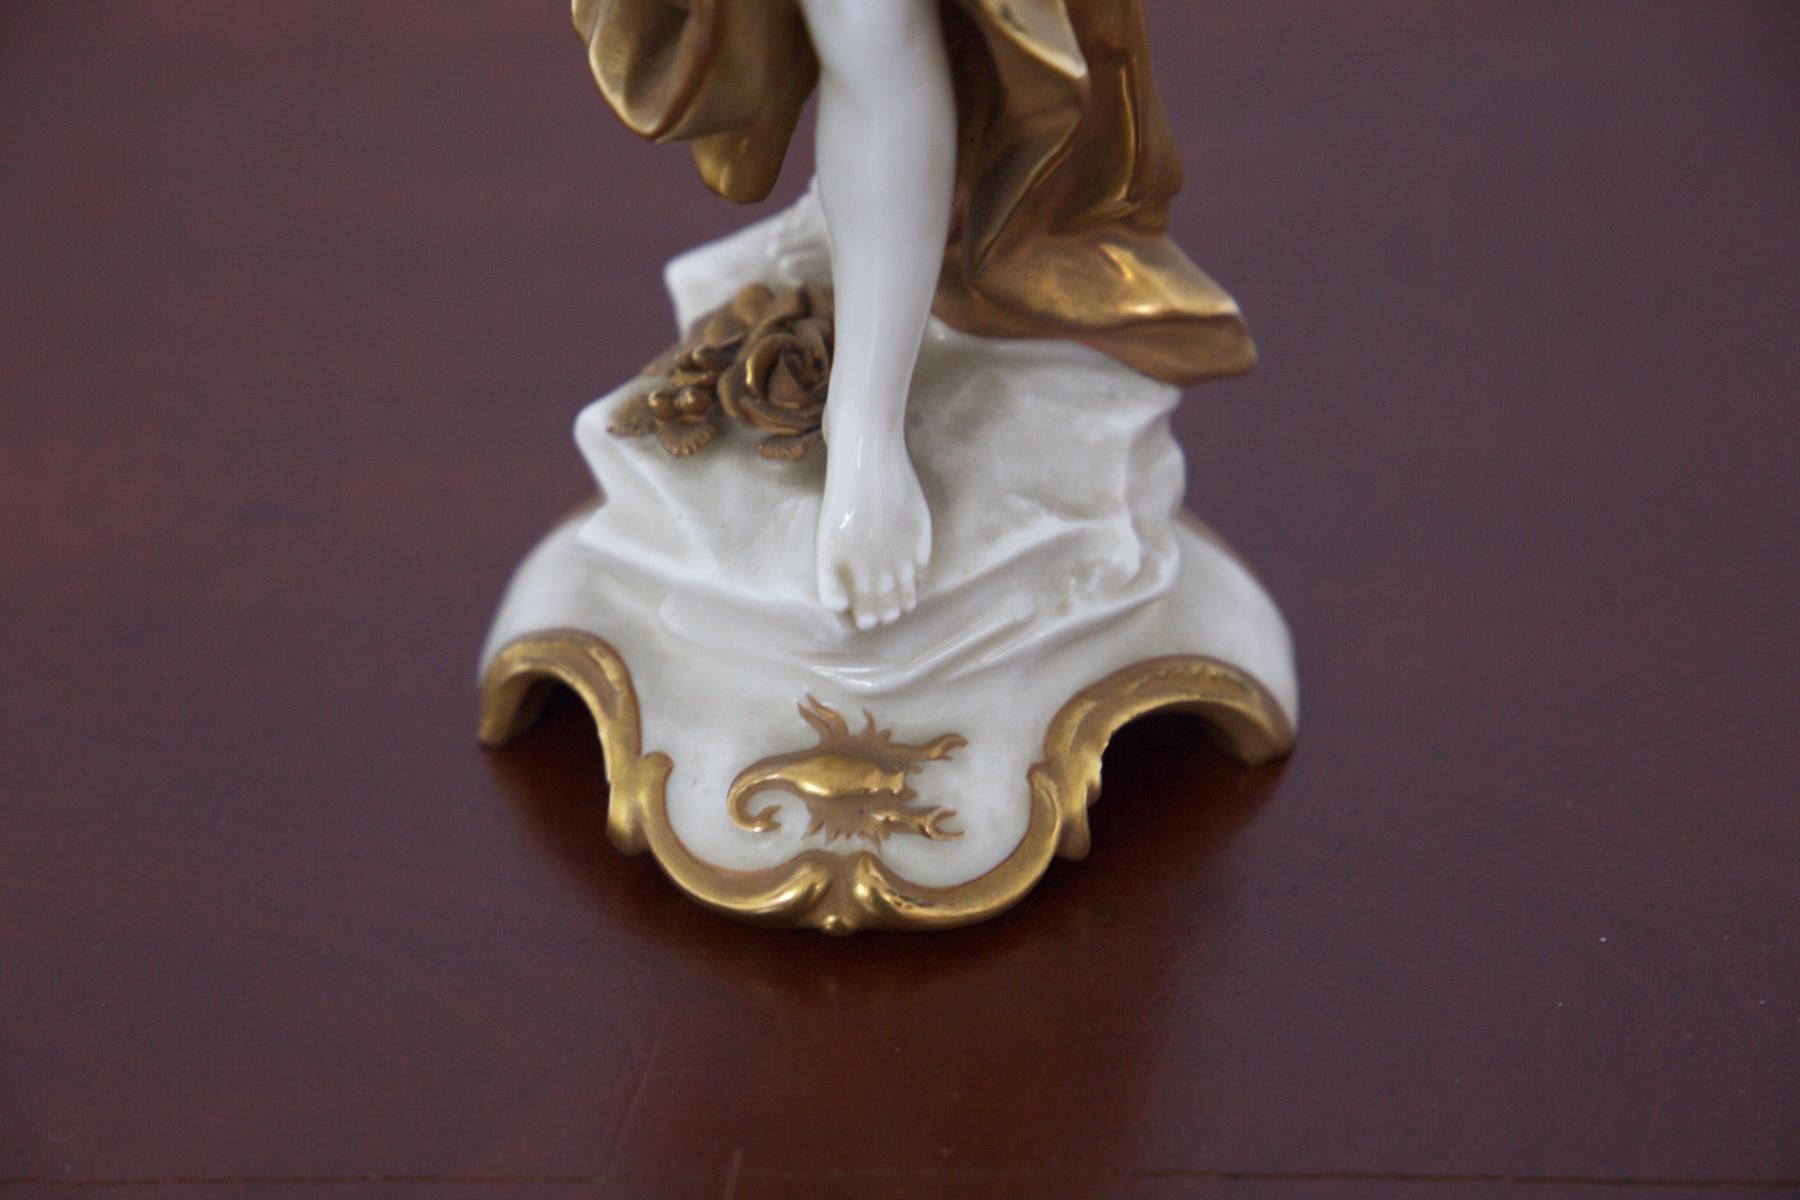 Stunning ceramic statuine, part of the 'Signs of the Zodiac' collection, made in the early 20th century from Capodimonte ceramic painted in gold.
Capodimonte is a type of Italian porcelain first developed in the 18th century. It is known for its